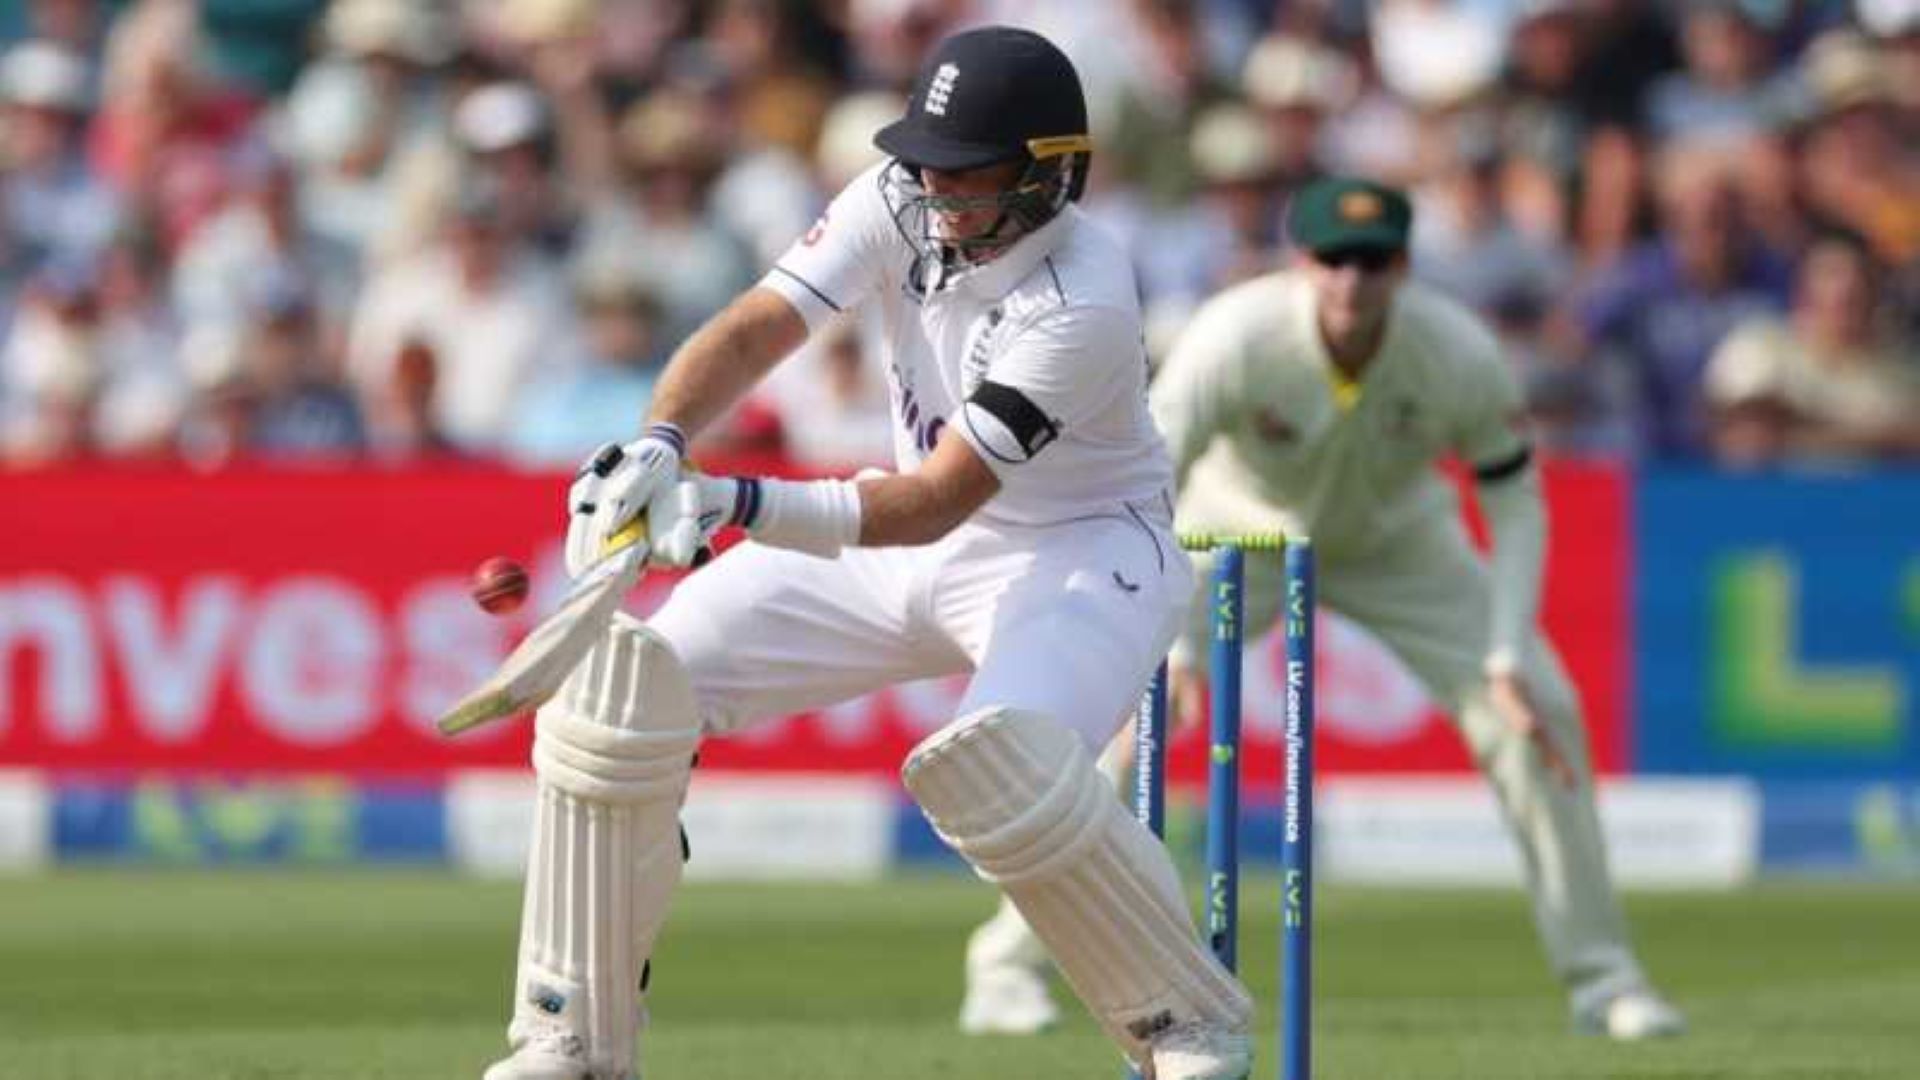 Joe Root pulled off a reverse scoop for six on Day 1 of the Ashes